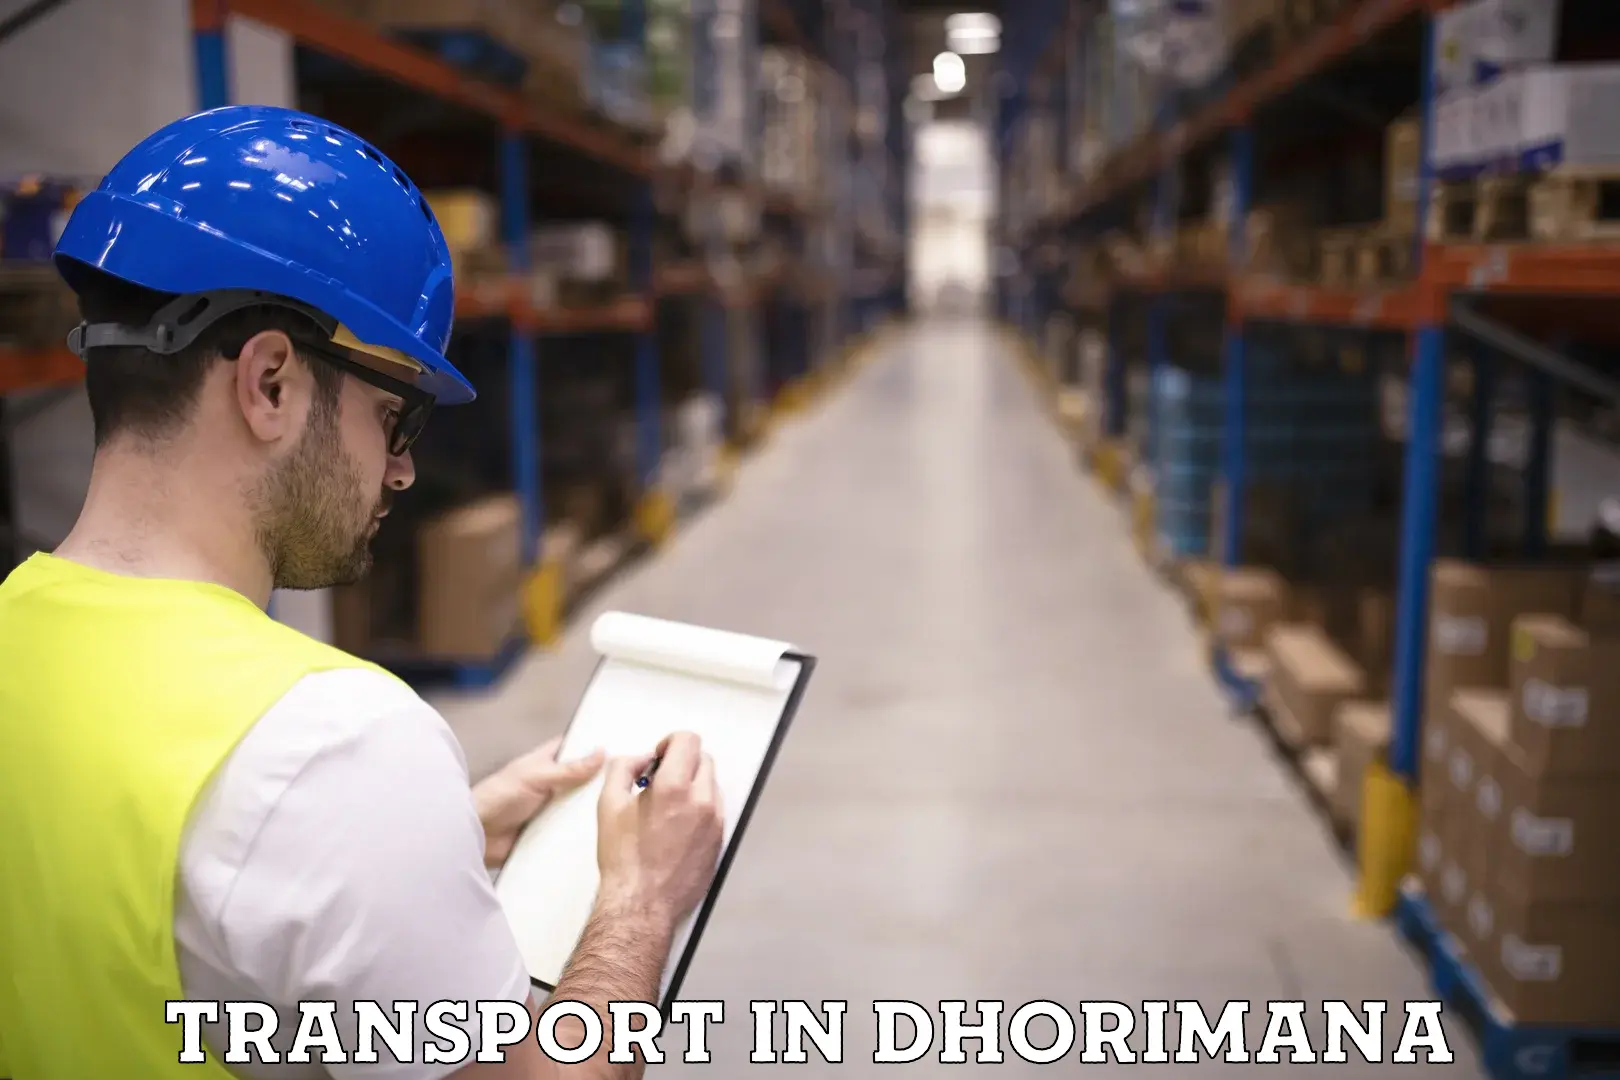 Transportation solution services in Dhorimana